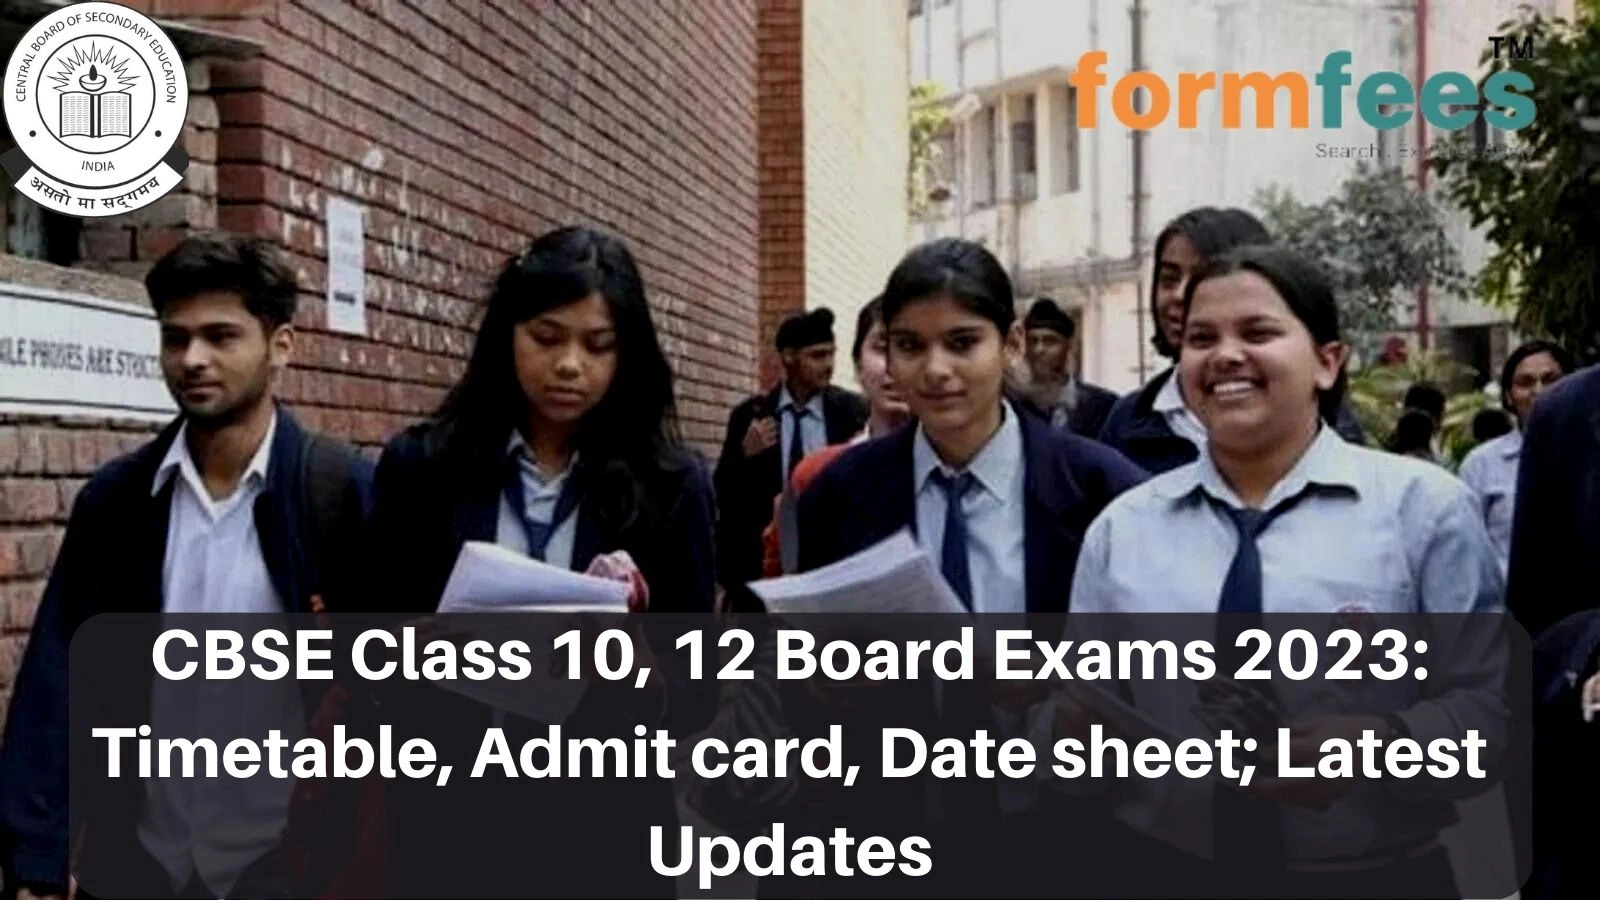 CBSE Class 10, 12 Board Exams 2023: Timetable, Admit card, Date sheet; Latest Updates